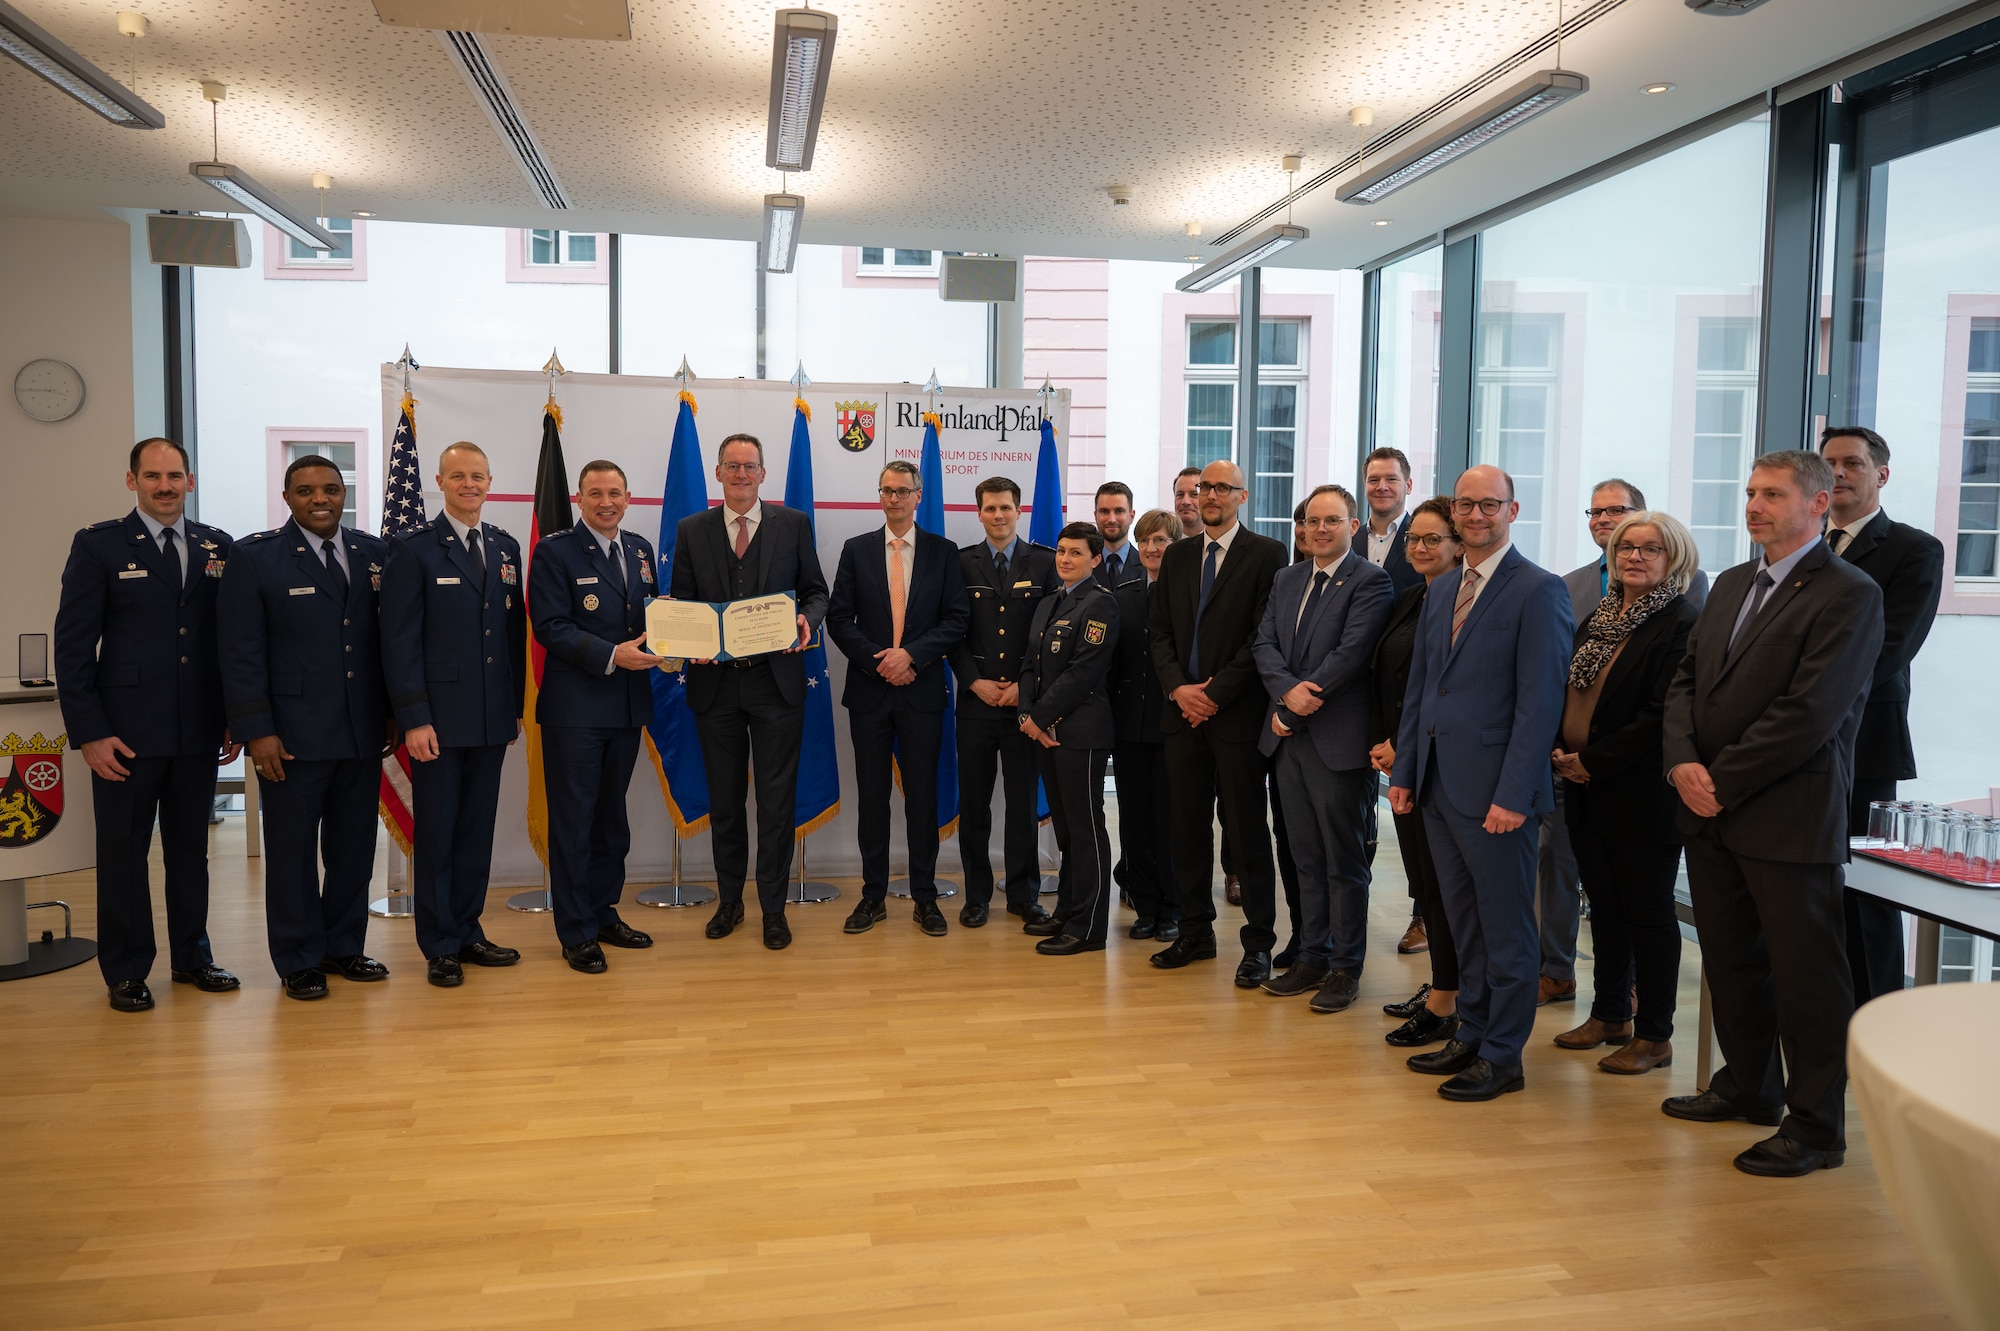 The German Ministry of the Interior and for Sports of the State of Rheinland-Pfalz received the USAFE-AFAFRICA Medal of Distinction for outstanding support of the U.S. Air Force in Germany.